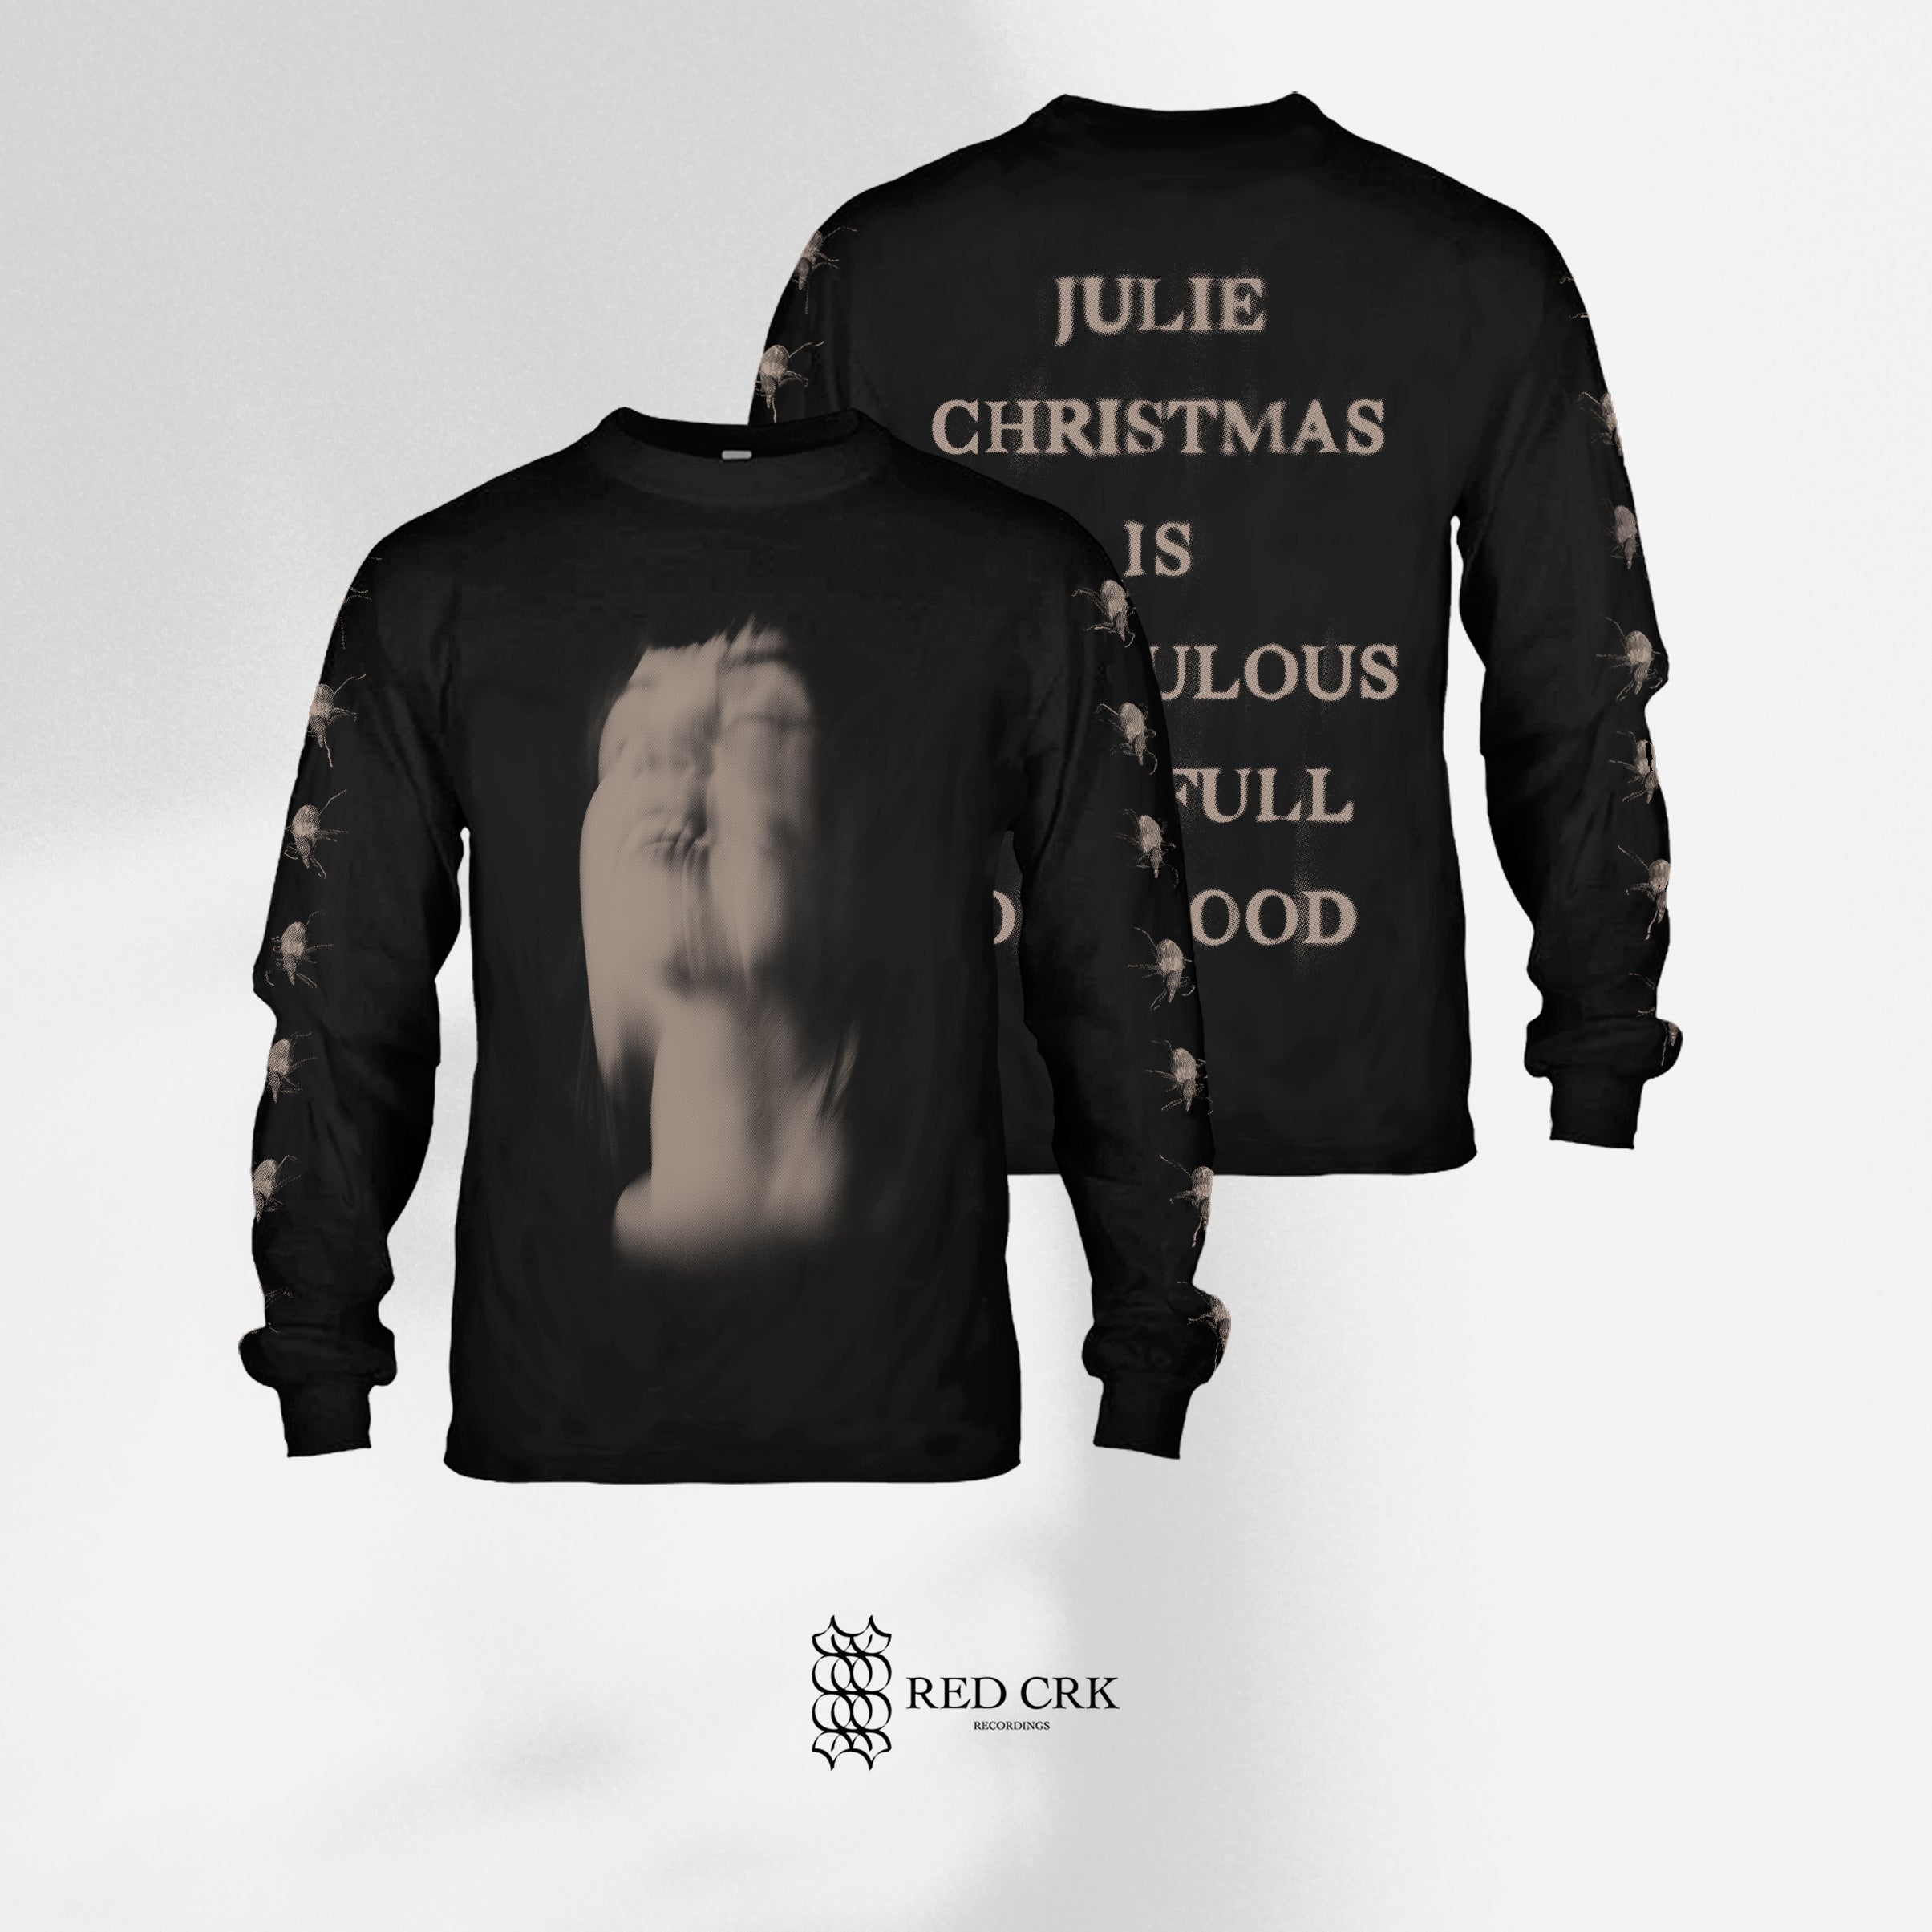 JULIE CHRISTMAS - Ridiculous And Full of Blood Screaming Long Sleeve (Pre-Order)